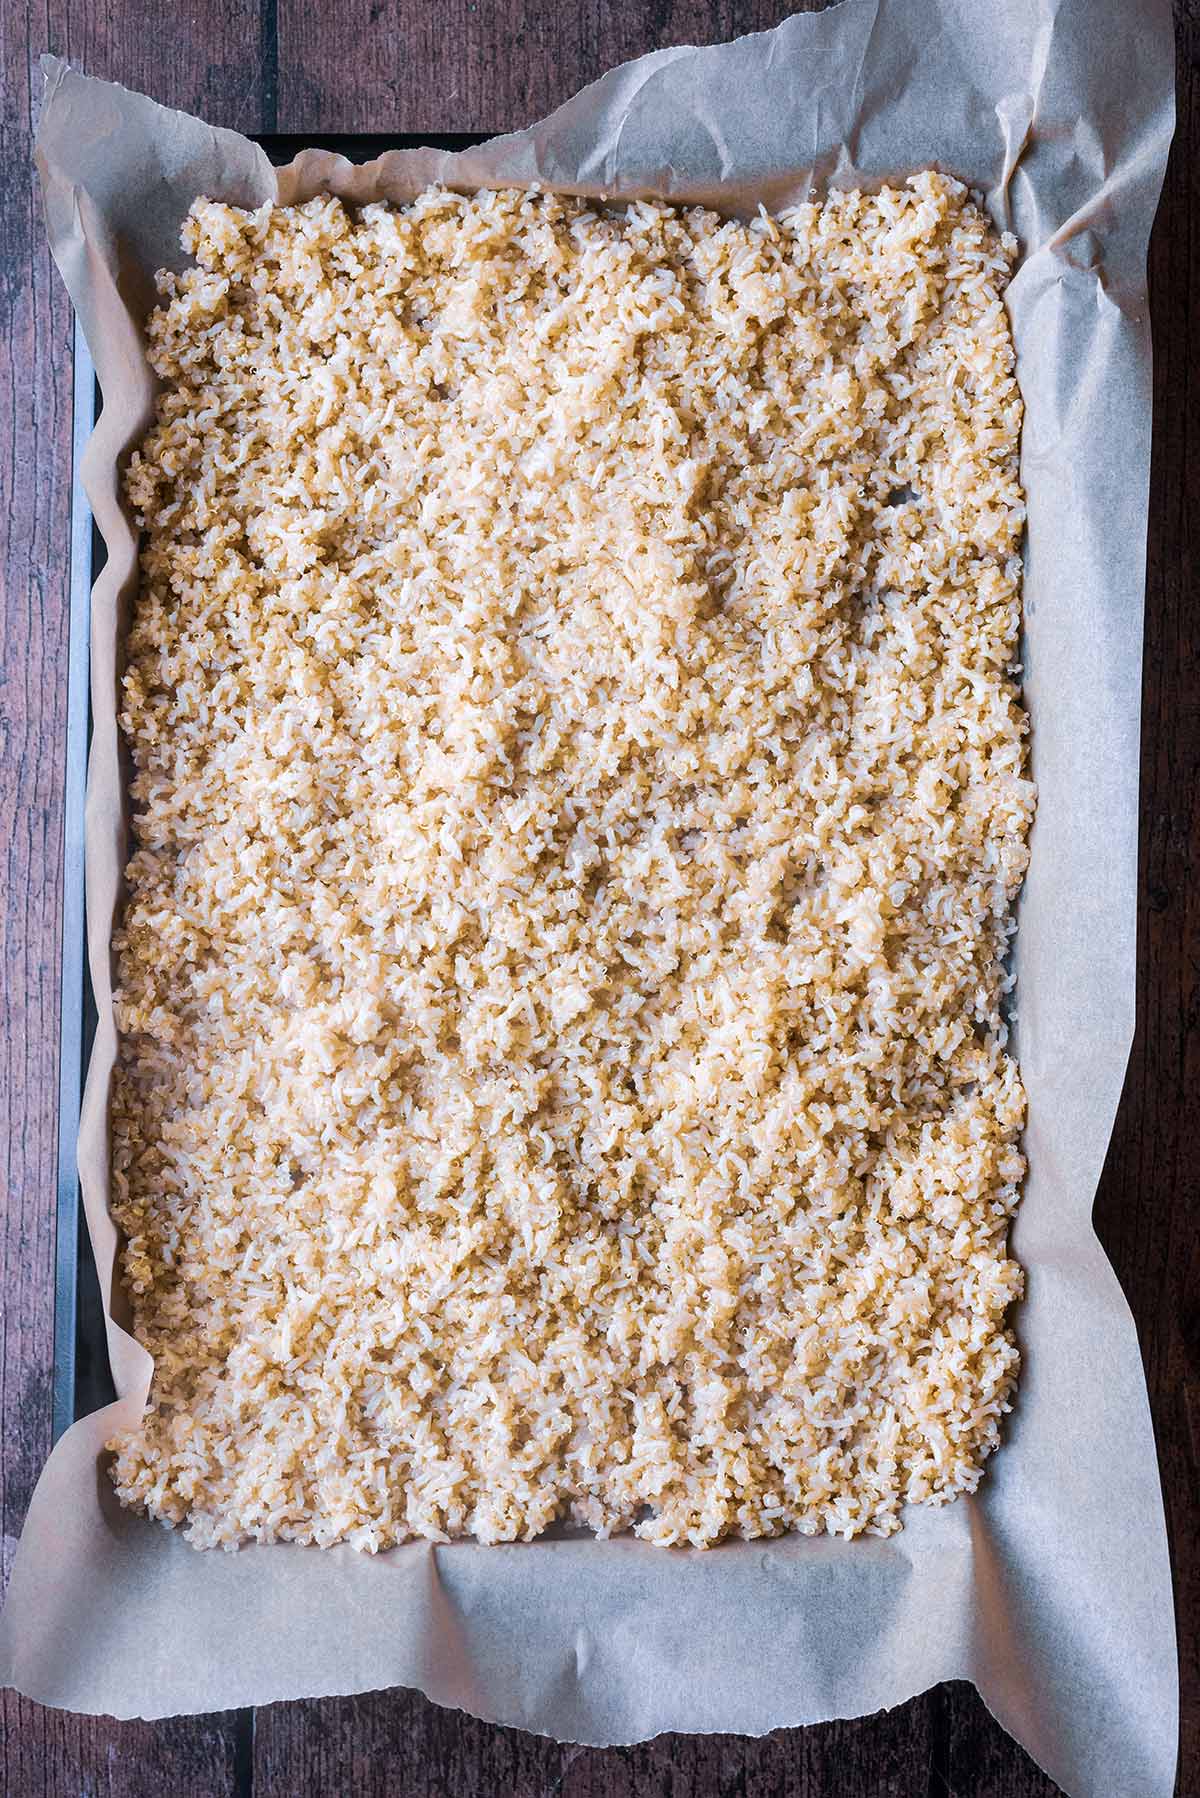 A lined baking tray with rice and quinoa cooling on it.